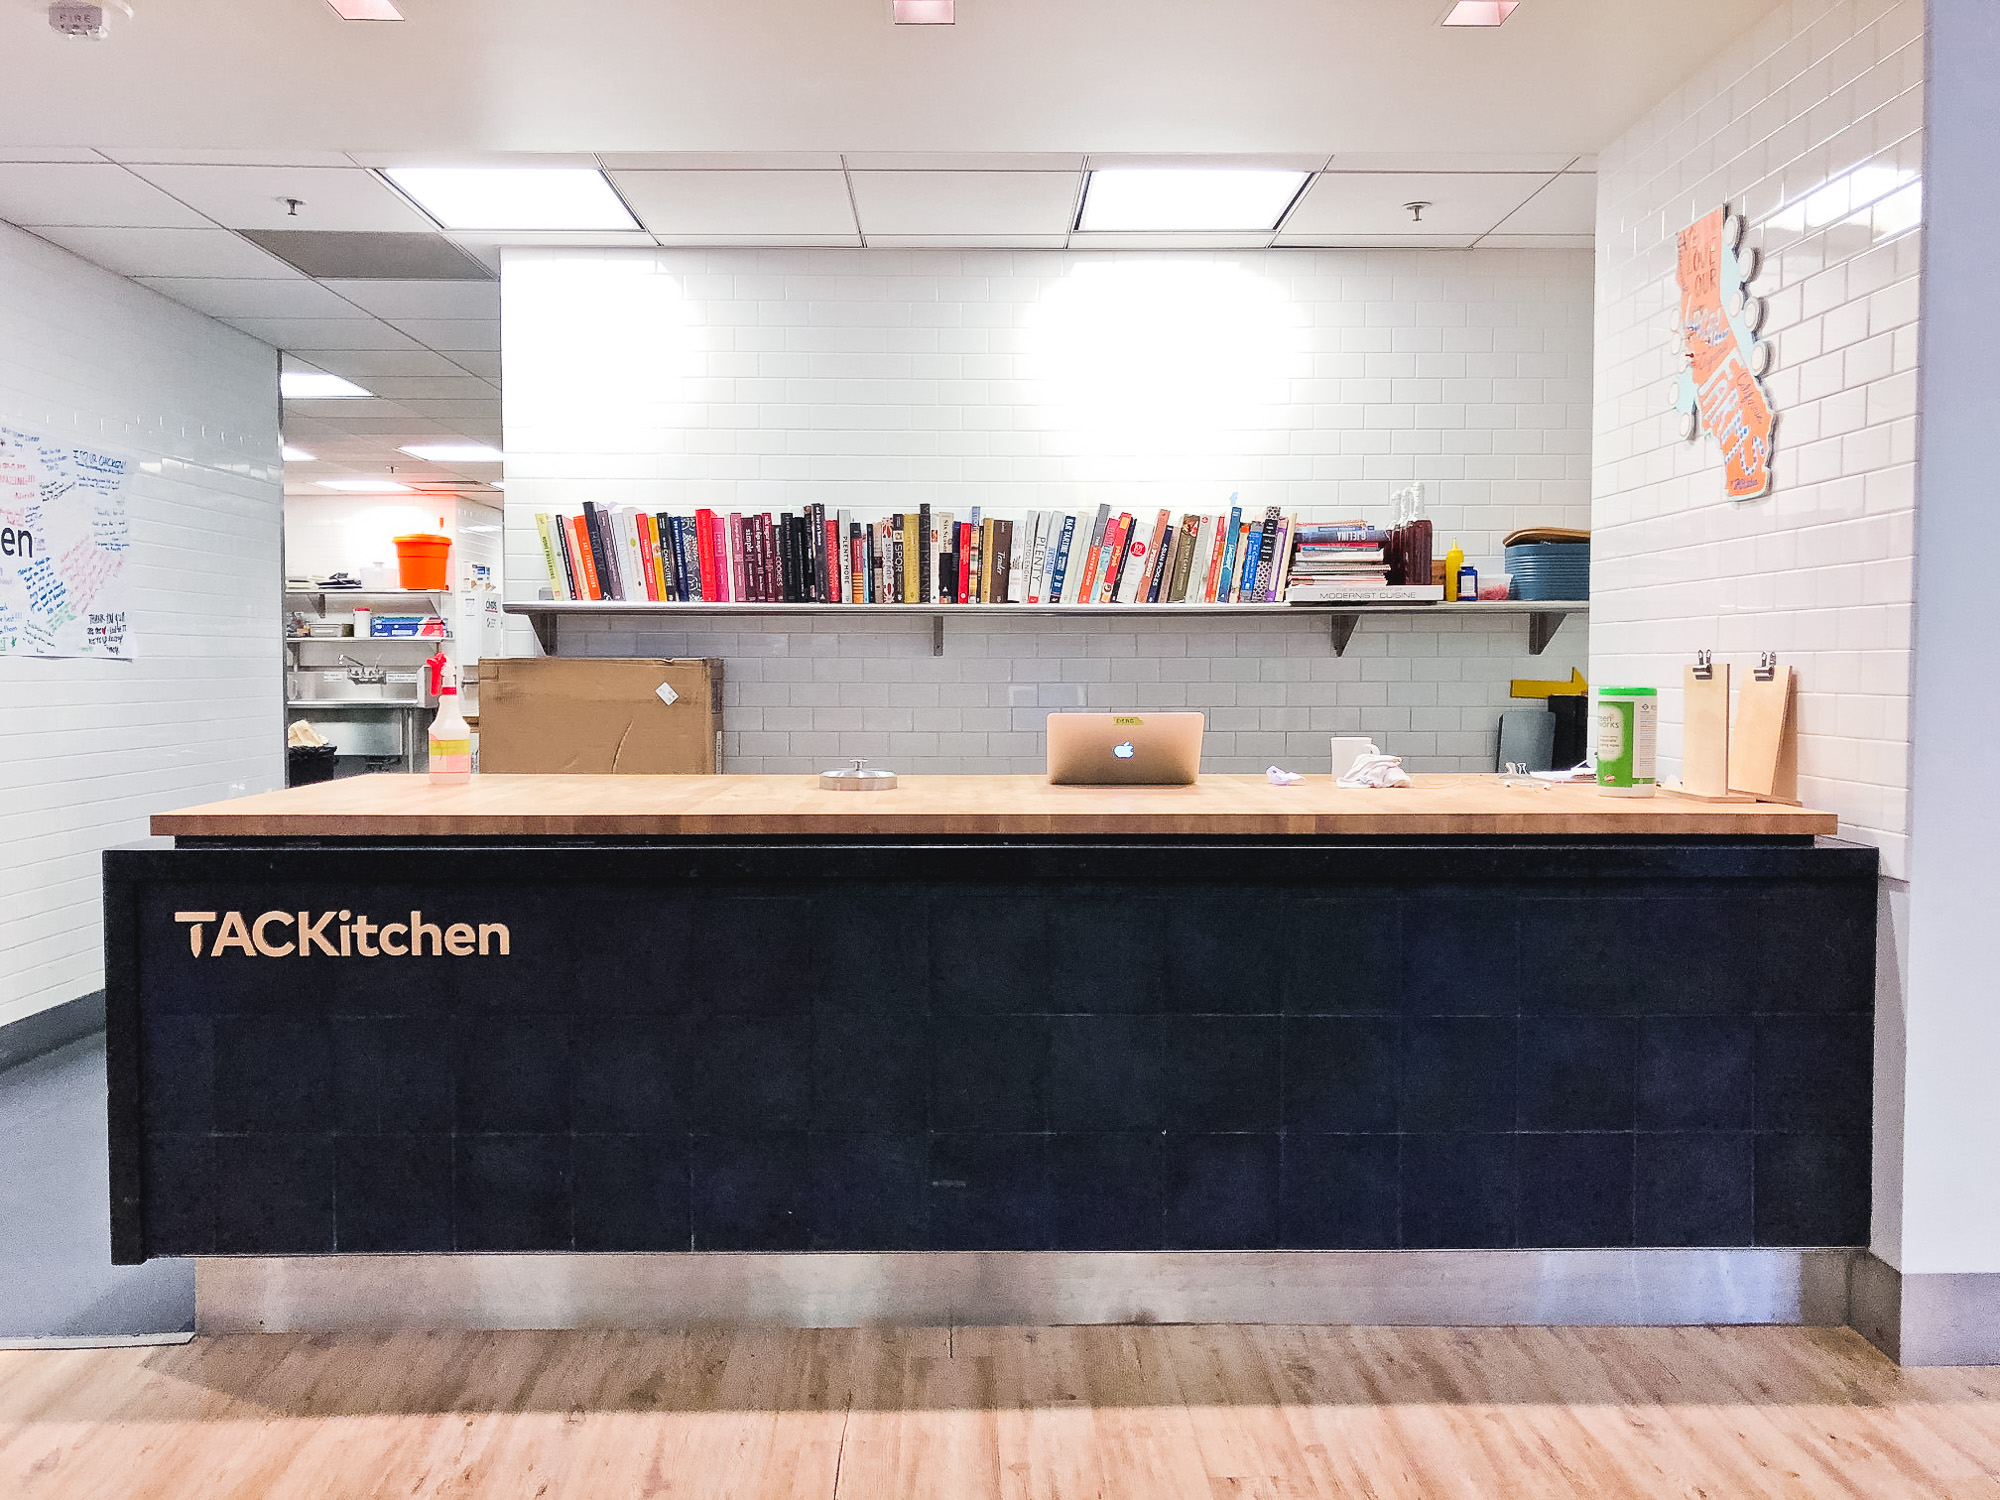 Wood letters on front counter at the cafeteria/kitchen of Thumbtack, an online service that matches customers with local professionals.